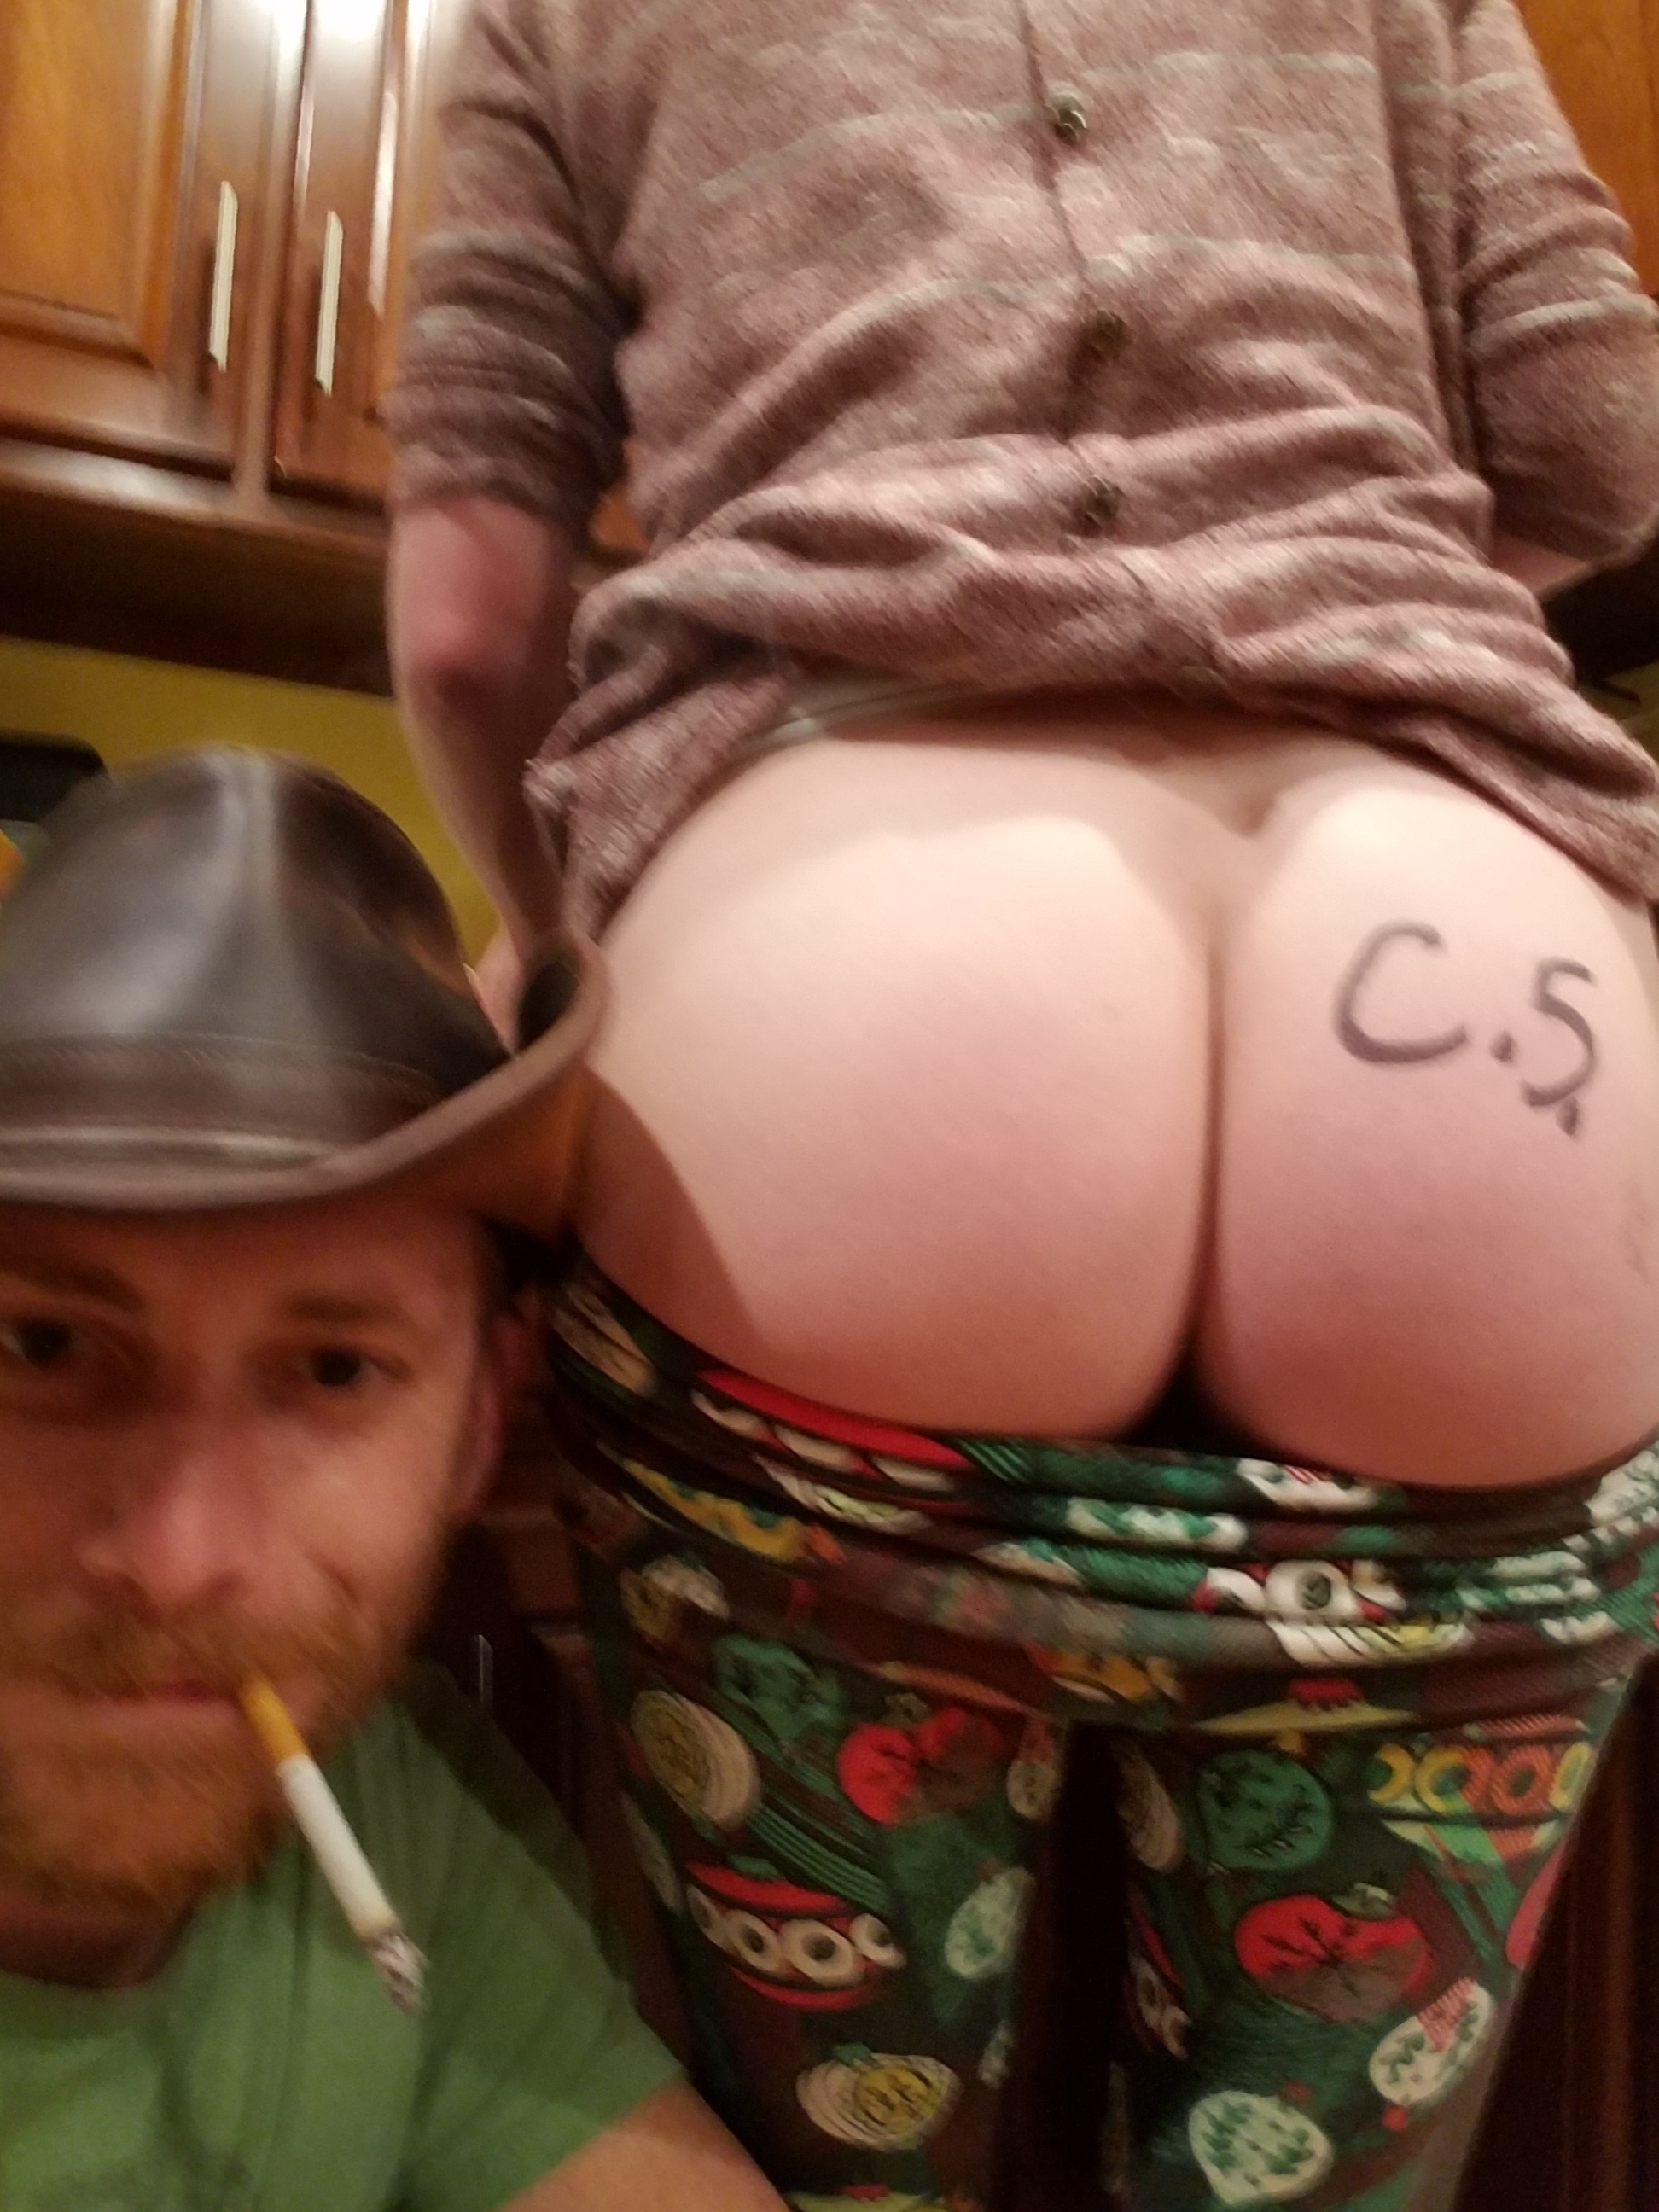 USER SUBMITTED ASS